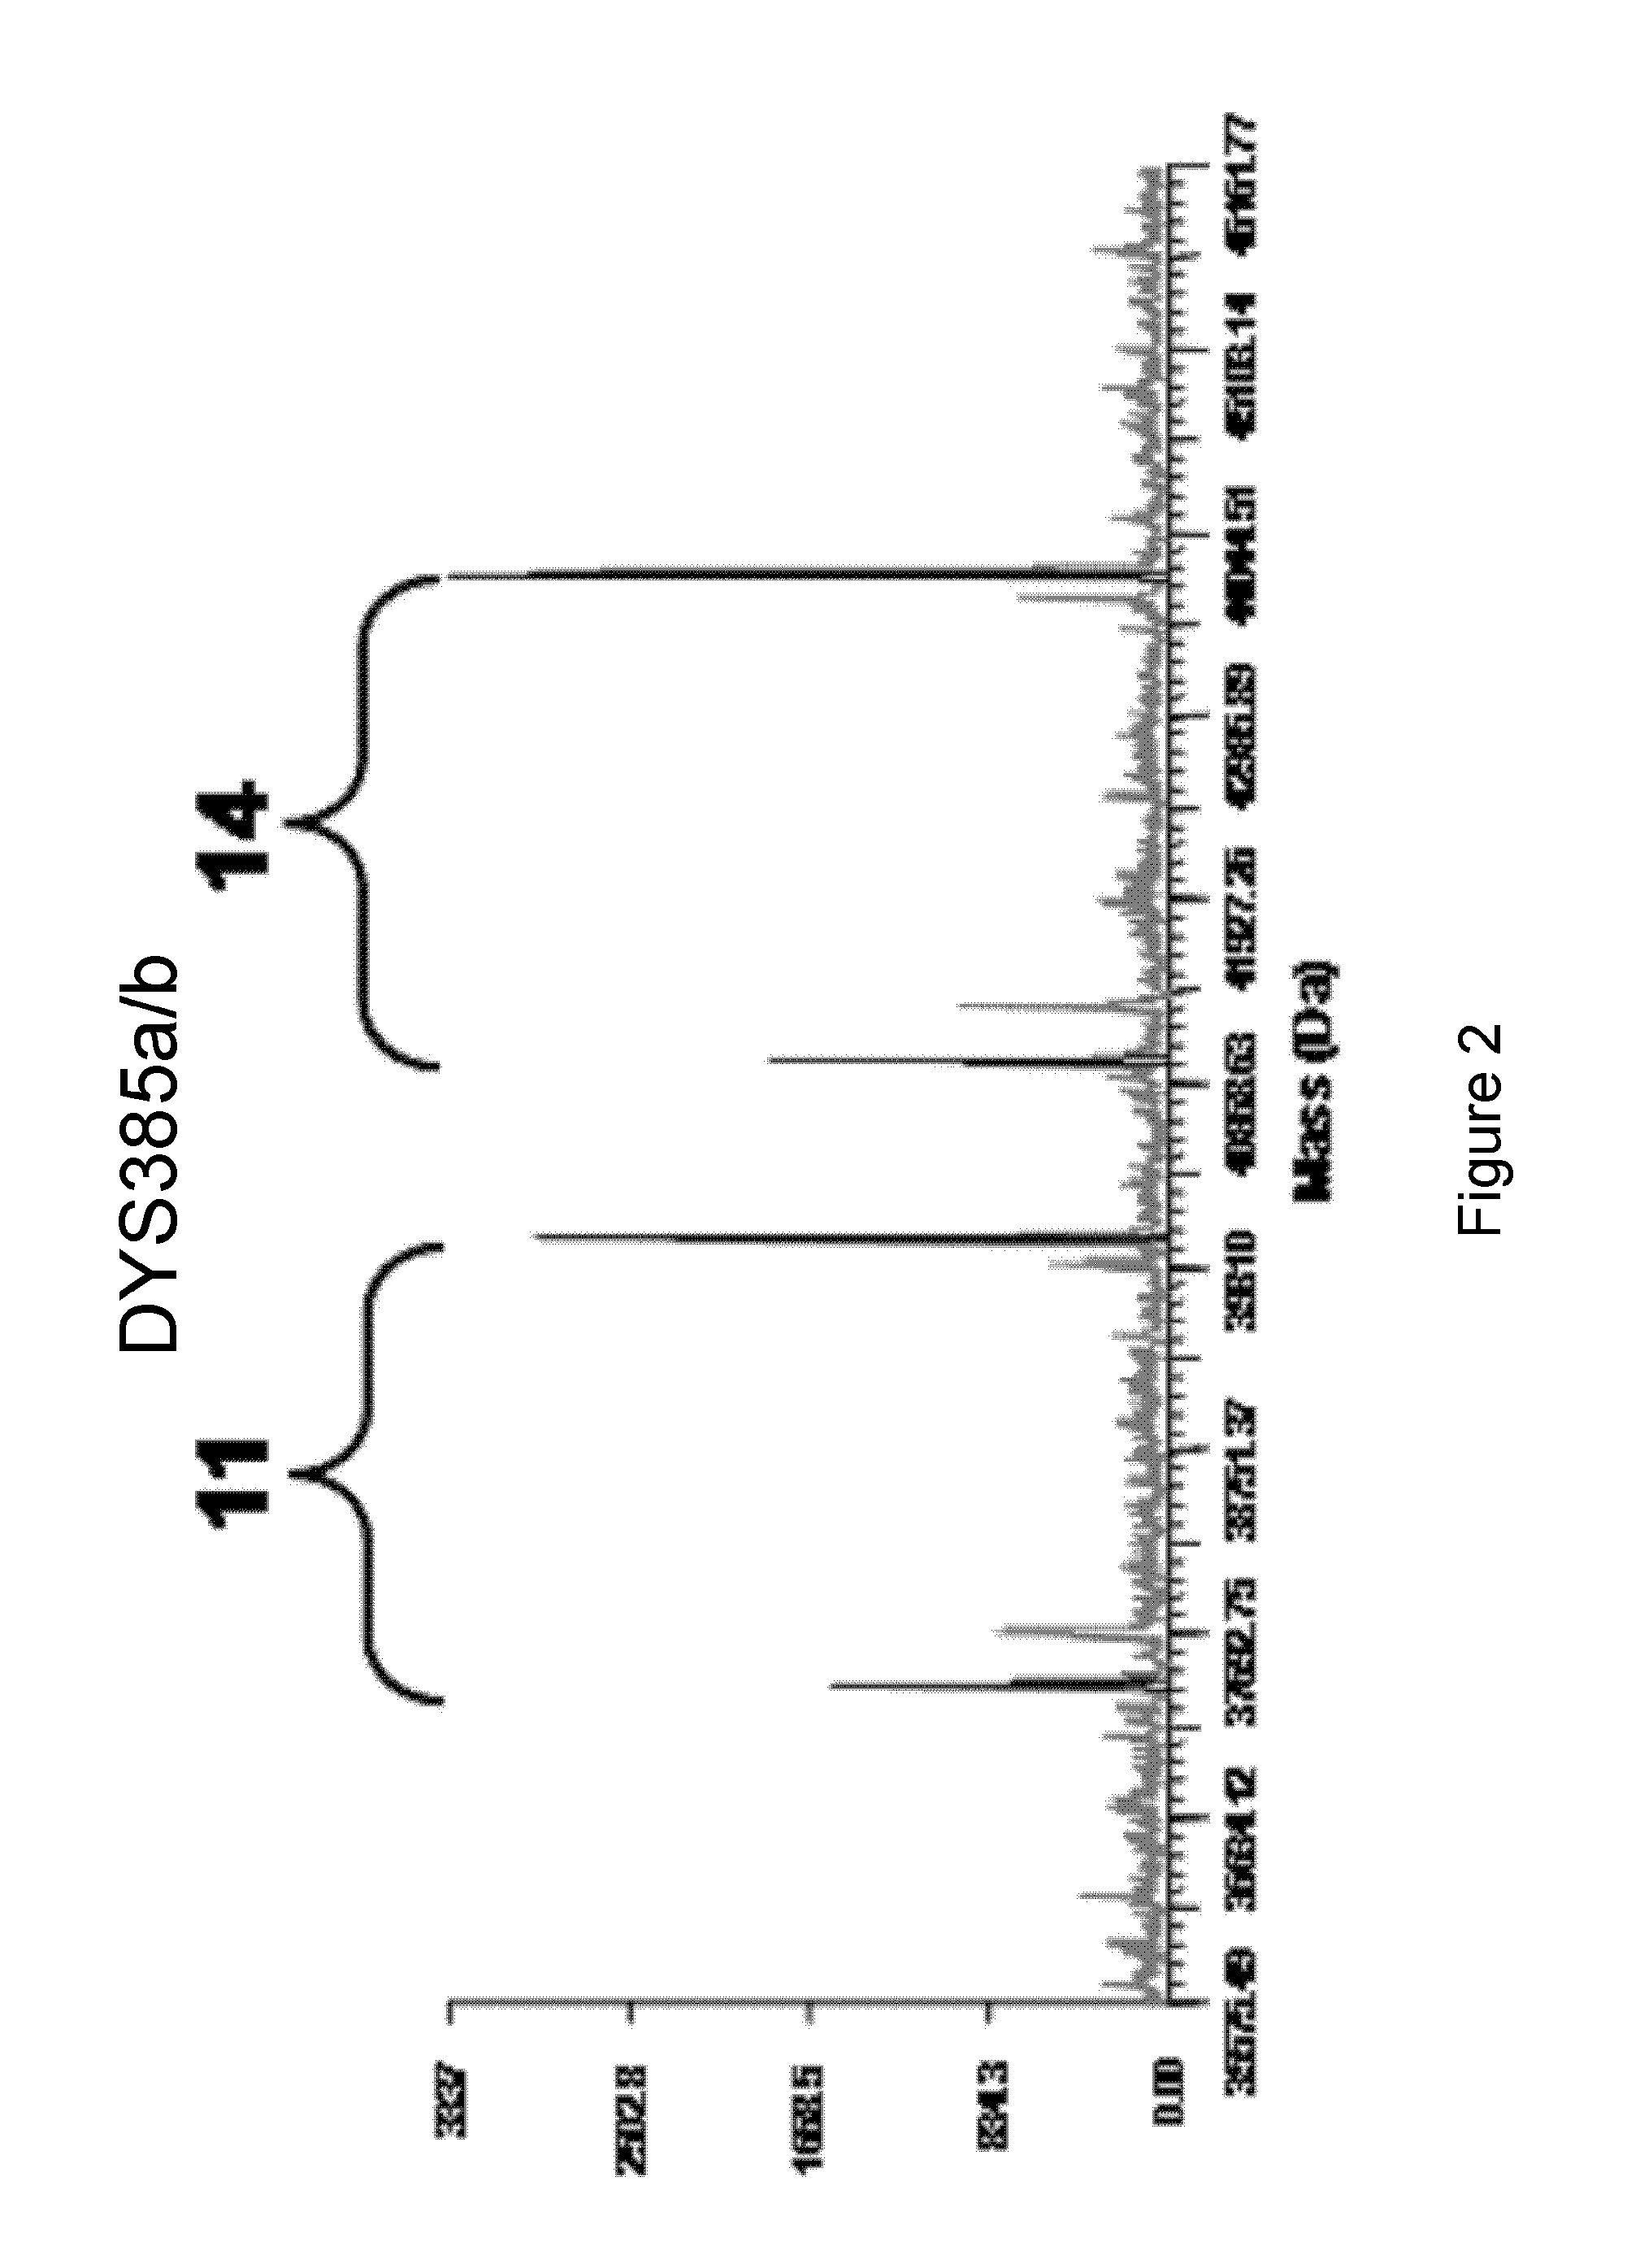 Methods For Rapid Forensic DNA Analysis